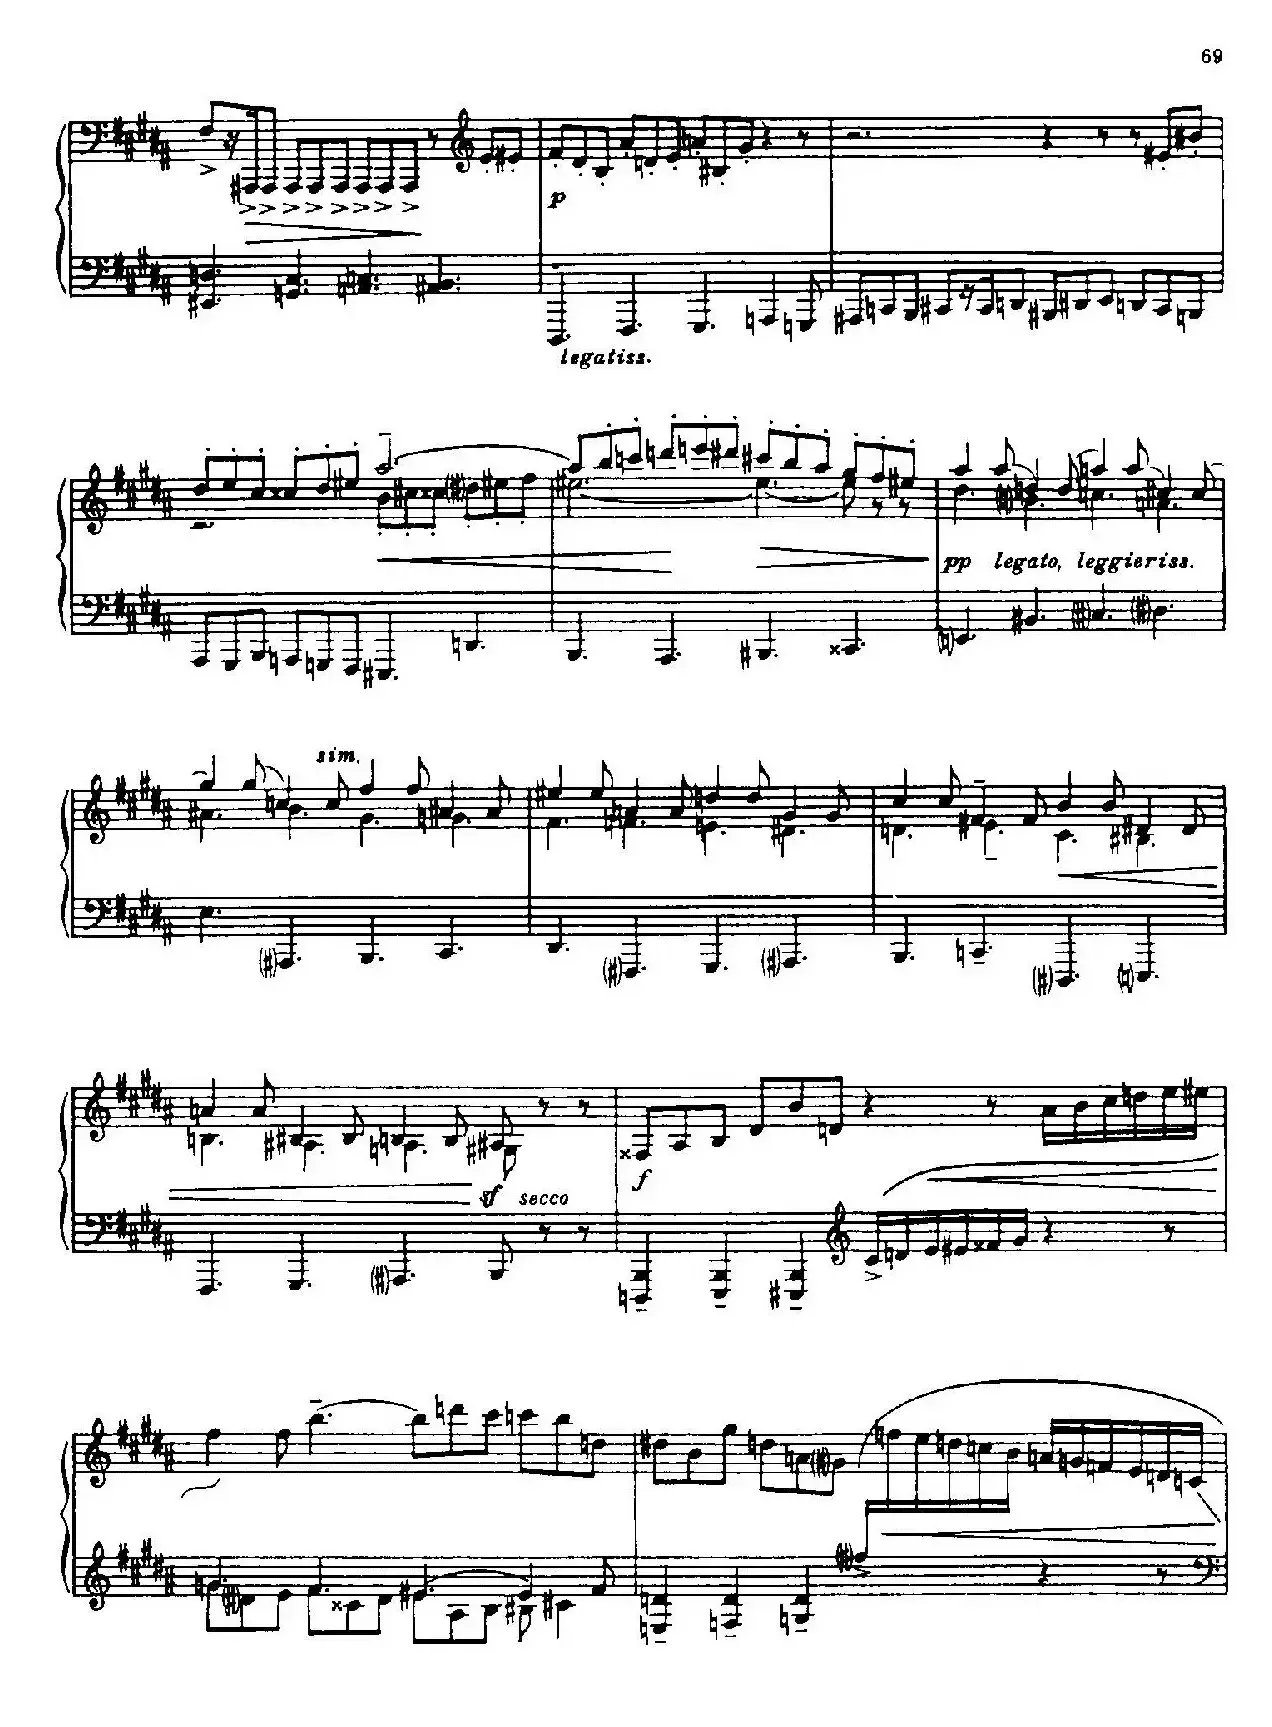 24 Preludes and Fugues Part.1 Op.45（24首前奏曲与赋格·第一部分·12）